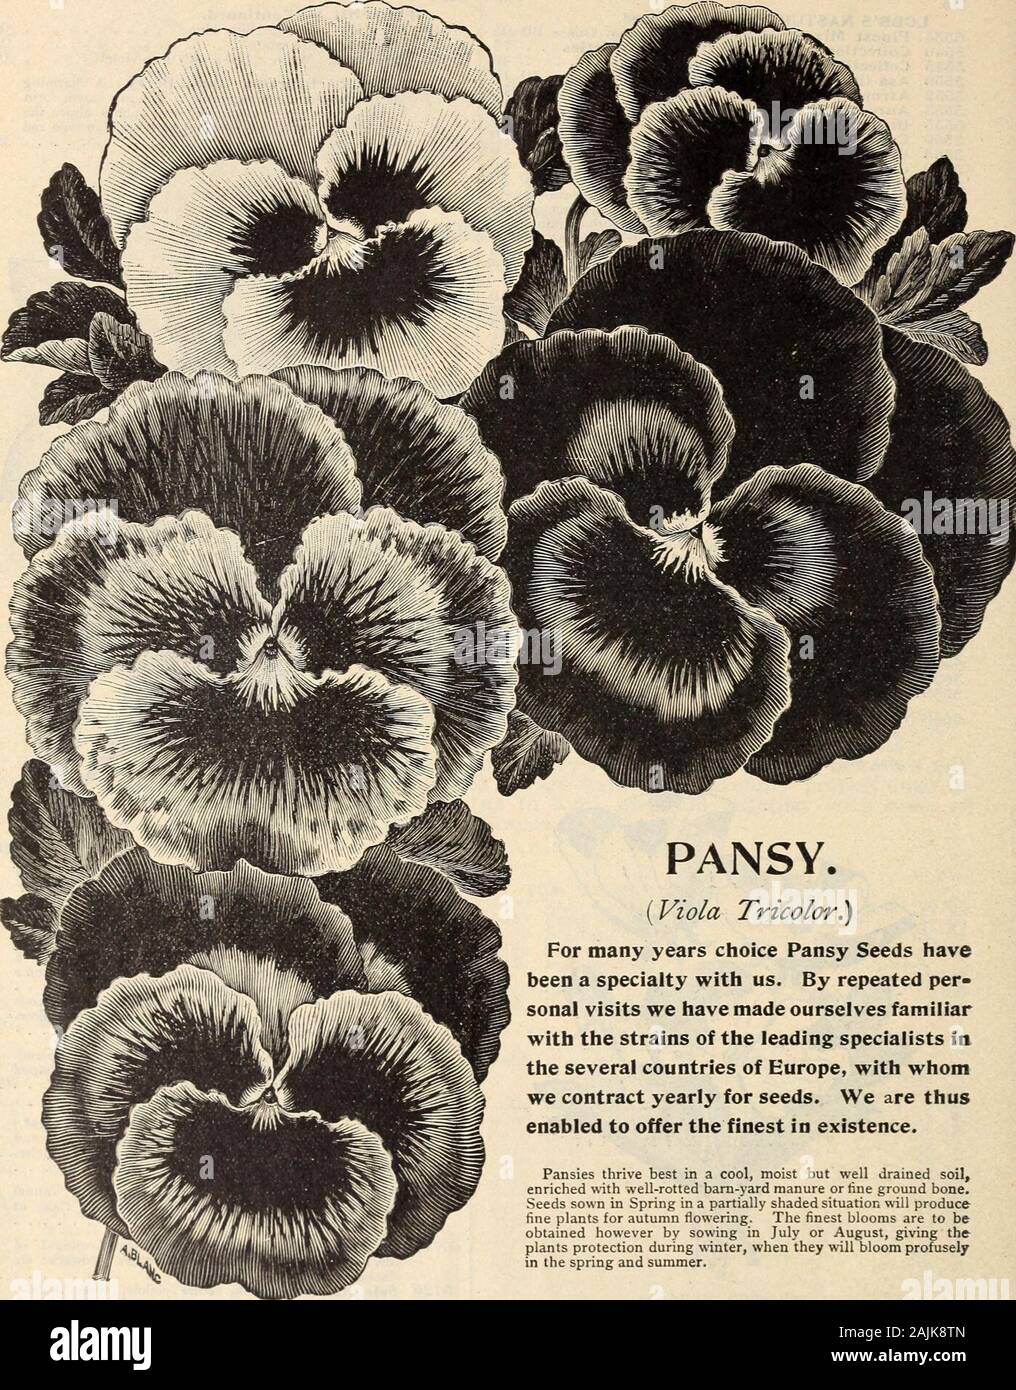 Farquhar's catalogue of seeds 1900 : plants, bulbs tools fertilizers, sundries . Flowers purple and white 05 5695 NIGELLA Damascene (Love=ln-A-Mist.) Showy half-hardy annual, with elegant cut foliage andinteresting little blue flowers. Height eighteen inches. .055700 Hispanica. Purple • 05 5710 NOLANA. Finest flixed. Trailing hardy annualwith large blue and white flowers resembling those ofthe Mor?iing Glory O5 5715 NYCTERINIA Capensis. Half-hardy annual ofdwarf growth with white sweet-scented flowers ; sixinches 05 5720 Selaginoides. Pink, centre yellow, three inches. 06 5725 NYJIPH/EA. (Wate Stock Photo